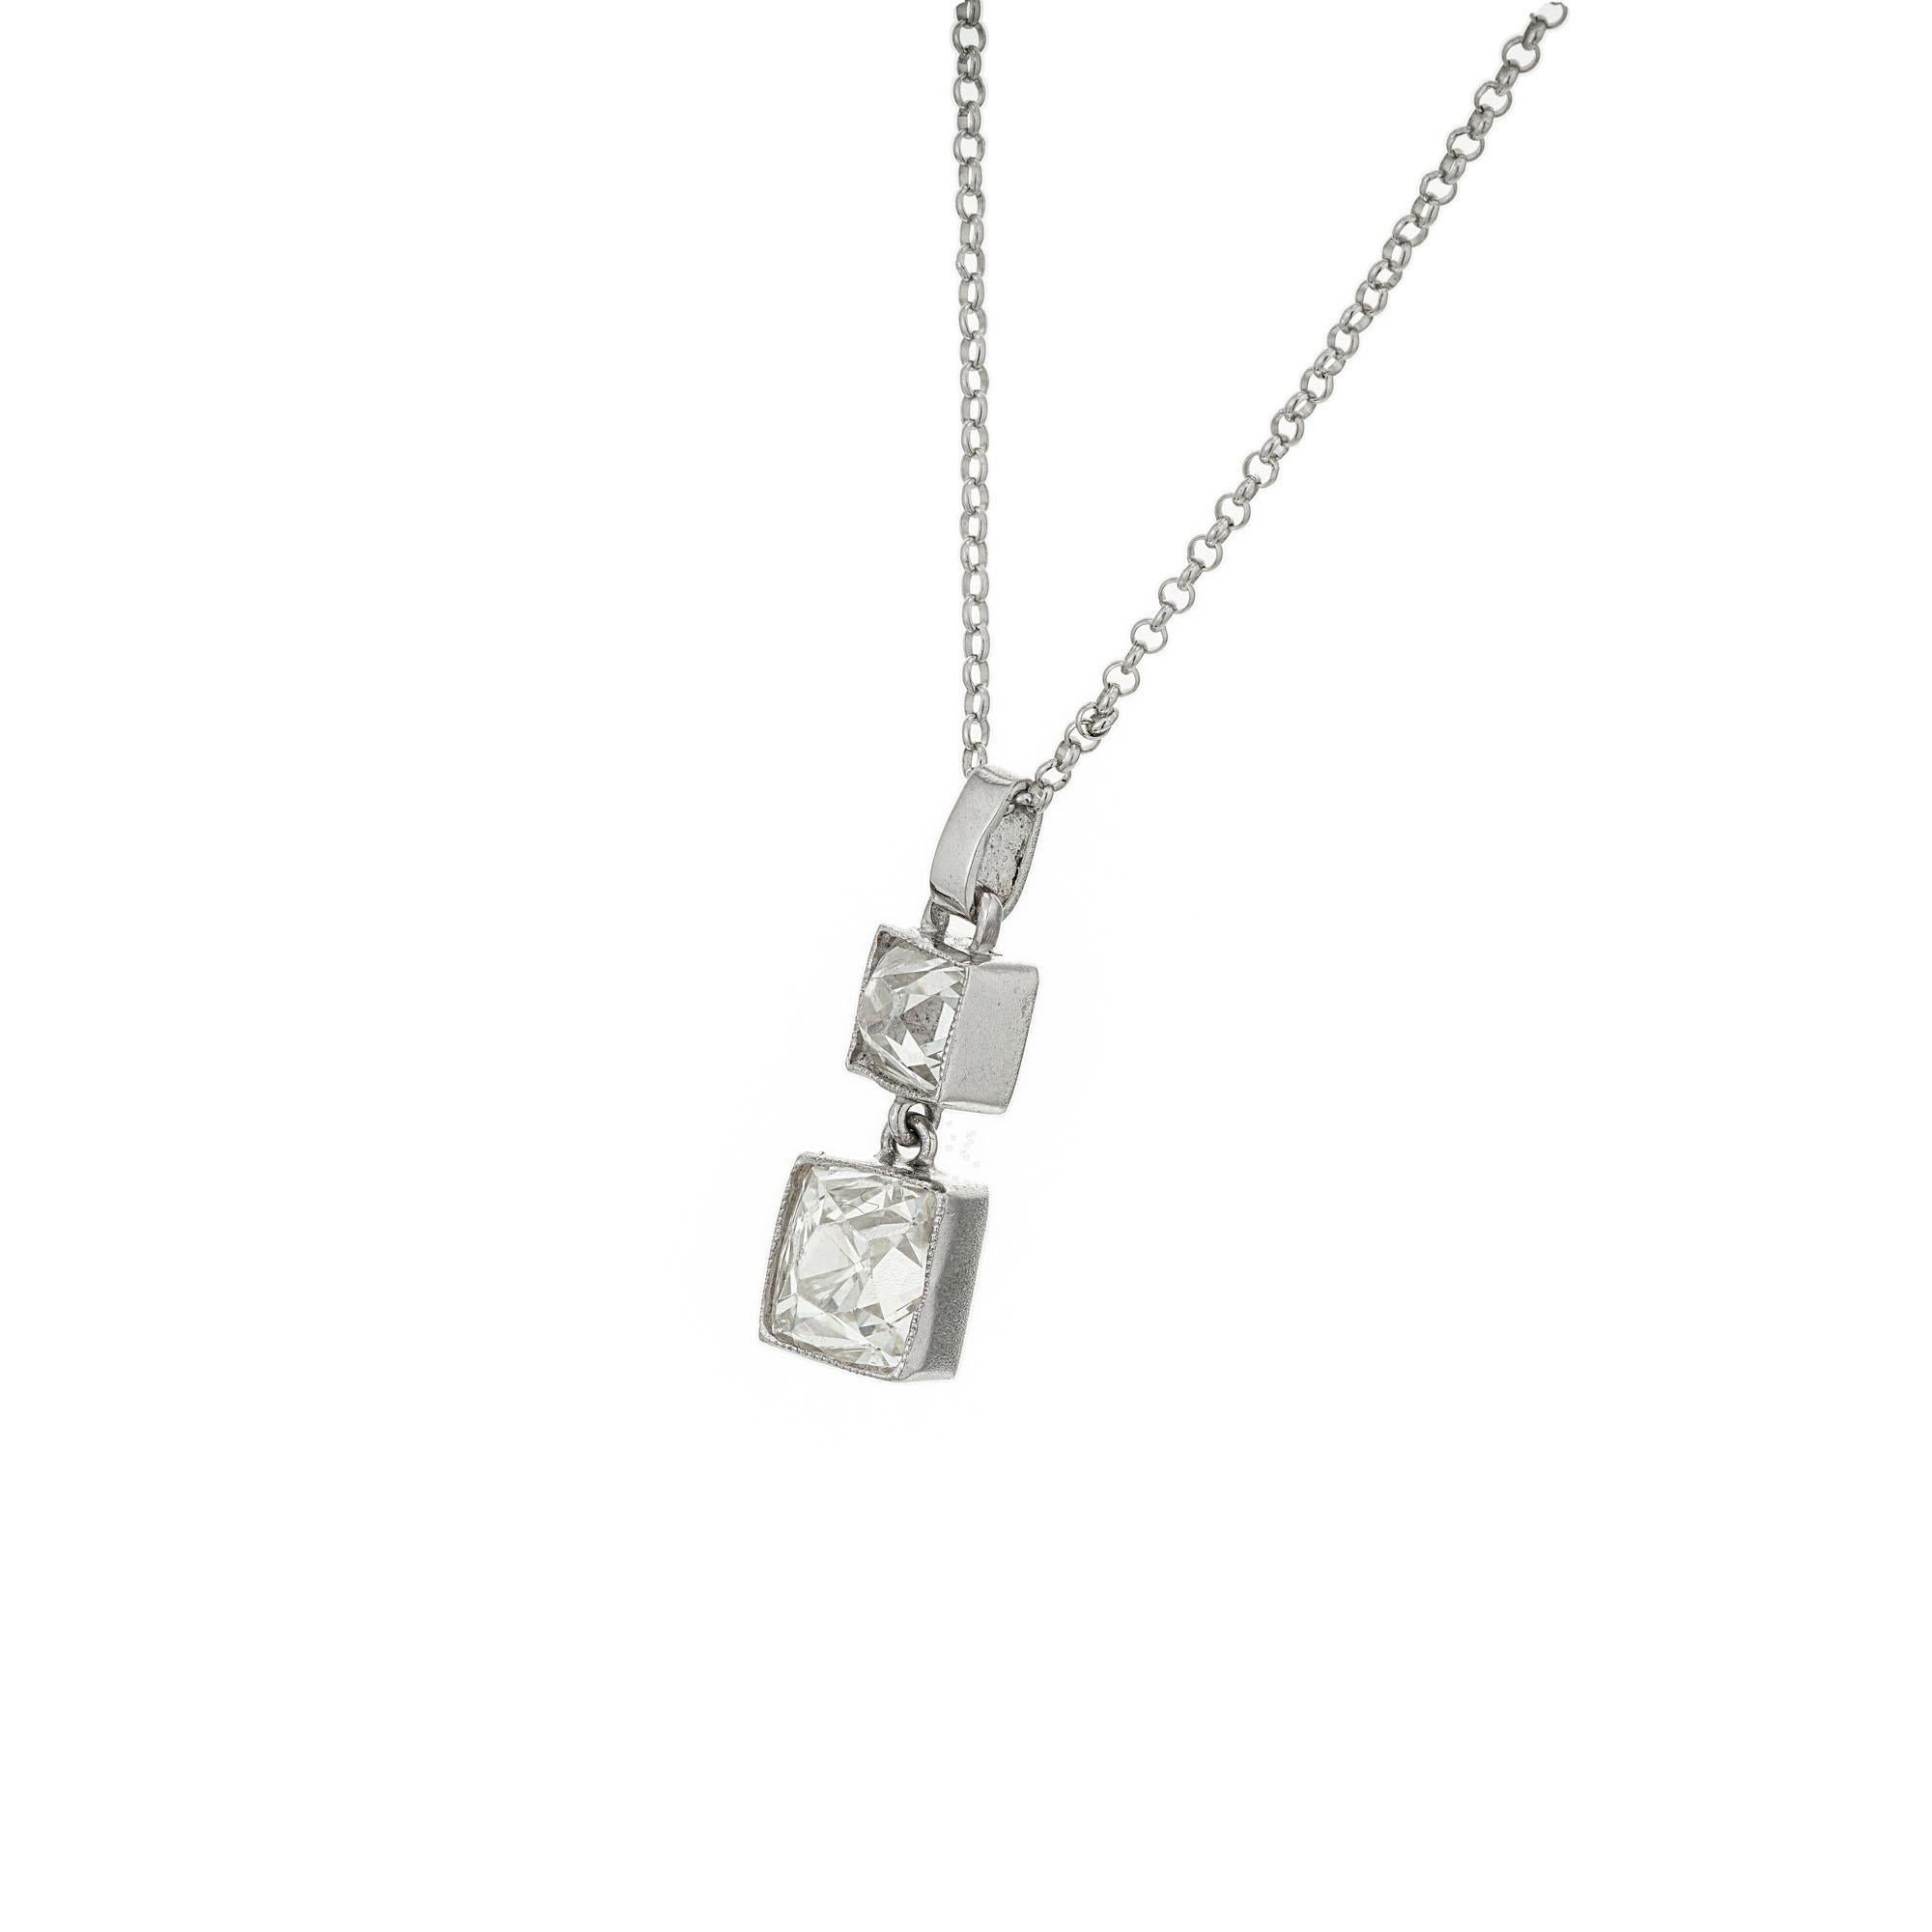 Custom made diamond dangle pendant necklace. 2 old mine cut diamonds that are bezel set in platinum one on top of the other connected by links with a 20 Inch platinum link chain with a lobster clasp. Designed and crafted in the Peter Suchy